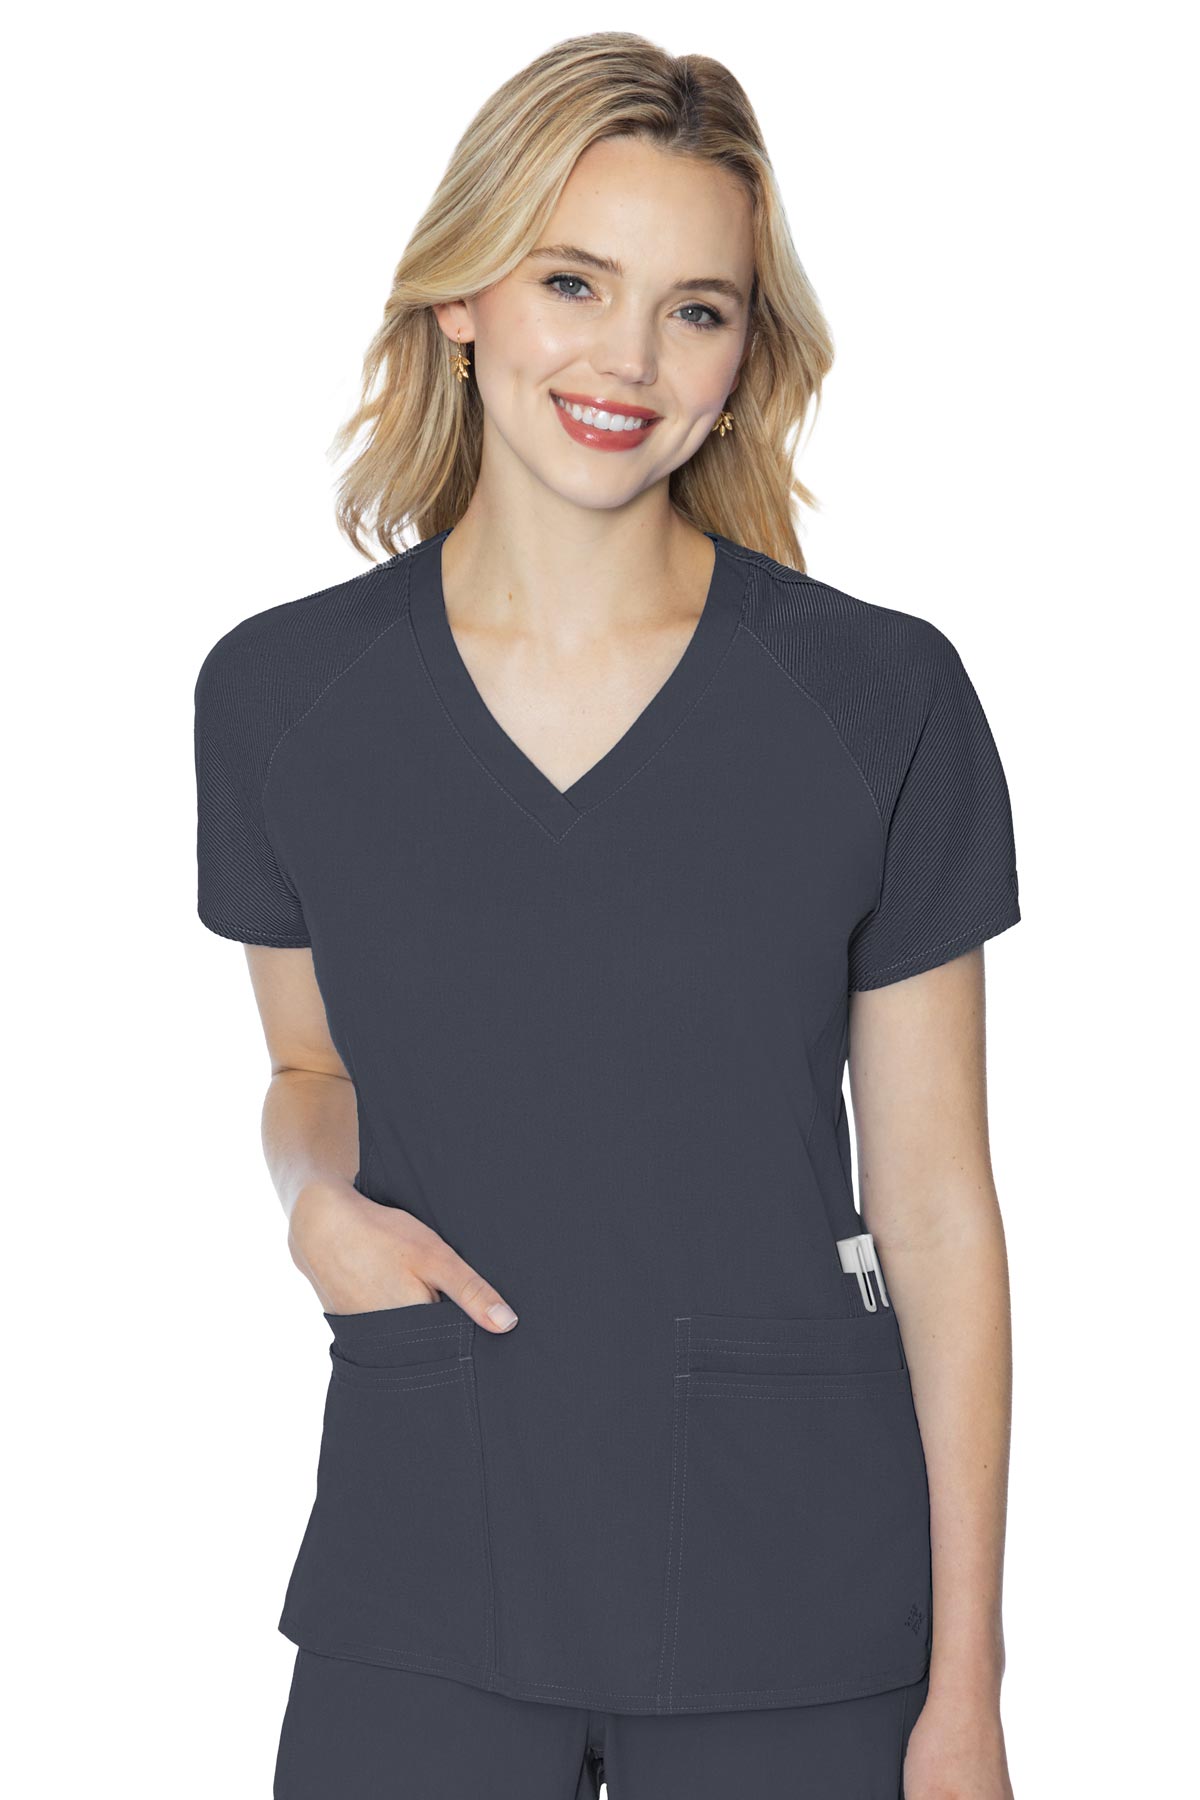 Med Couture Scrub Top Touch Raglan Sleeve in pewter at Parker's Clothing and Shoes.